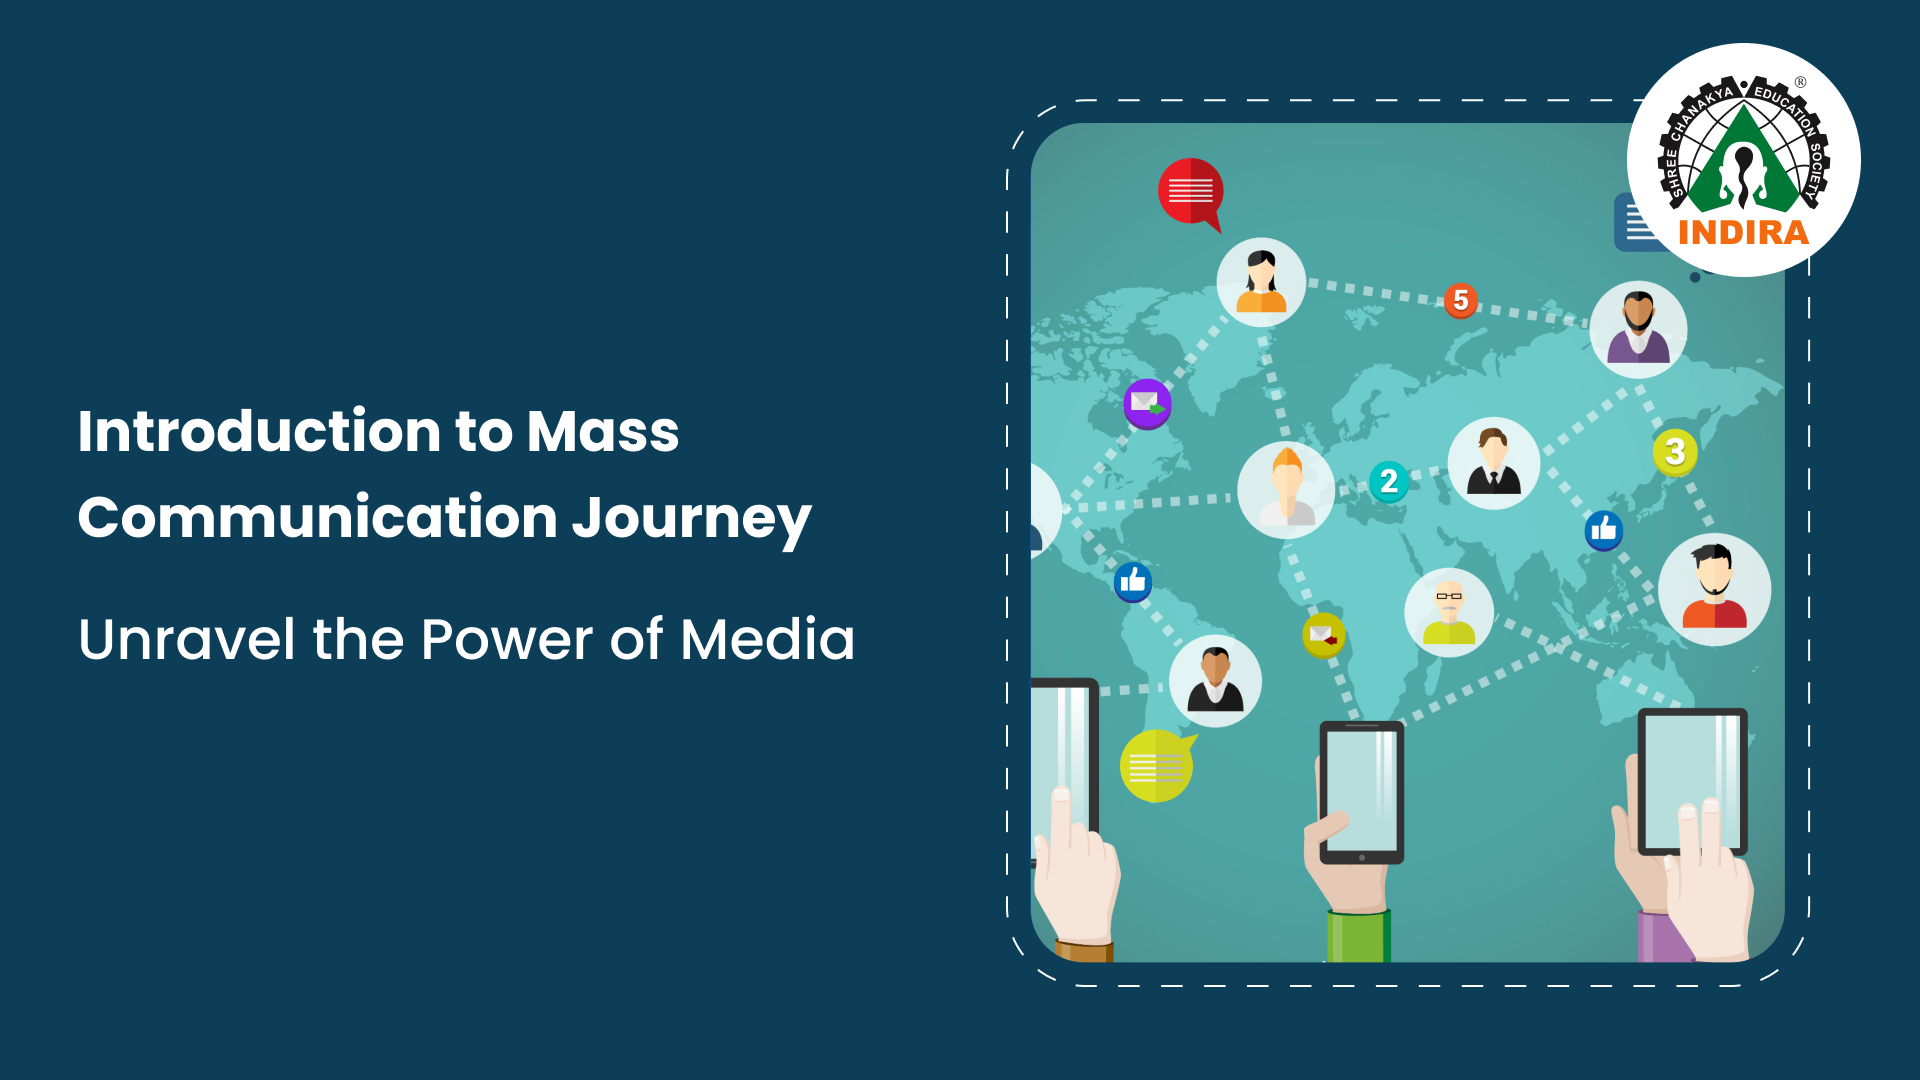 Introduction to Mass Communication Journey: Unravel the Power of Media